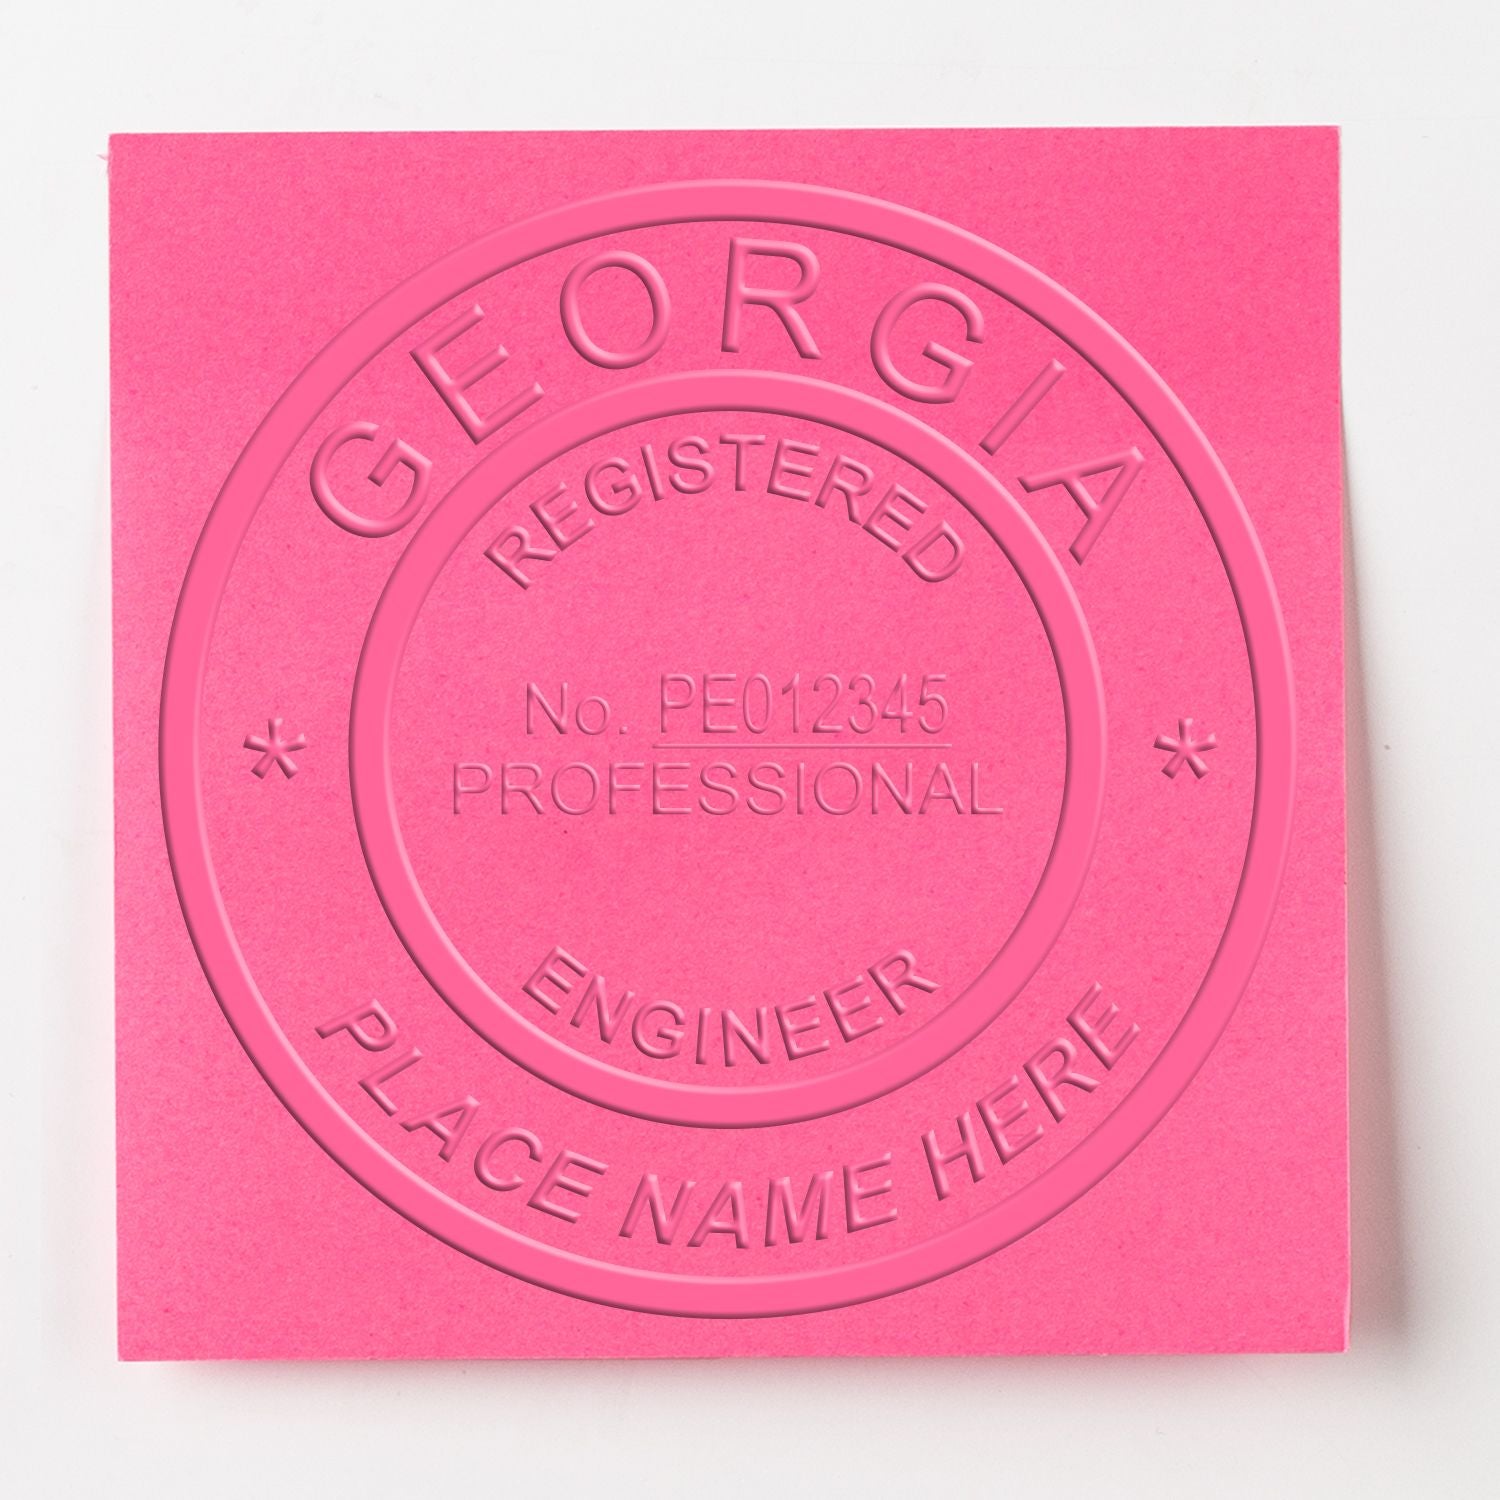 The main image for the State of Georgia Extended Long Reach Engineer Seal depicting a sample of the imprint and electronic files